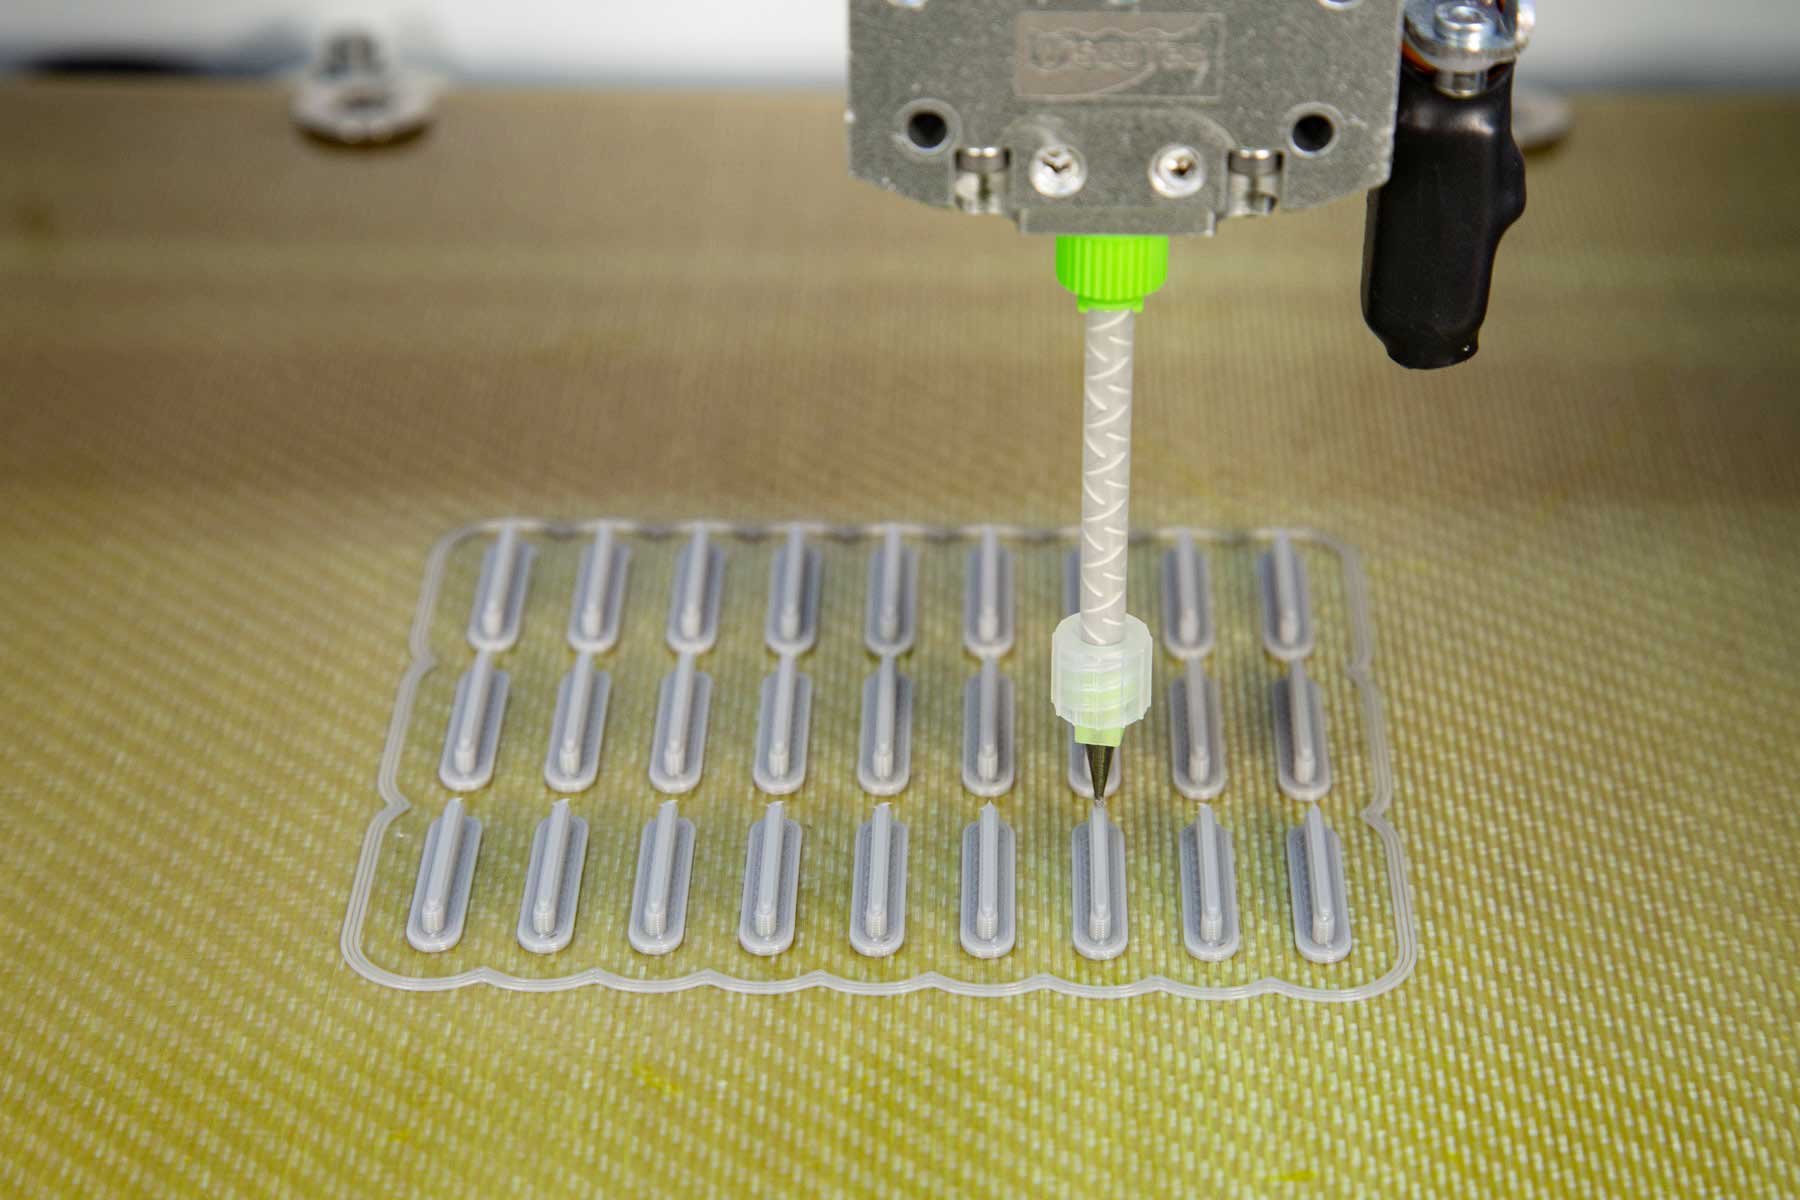 3D Printing of 27 parts in silicone in 30 min